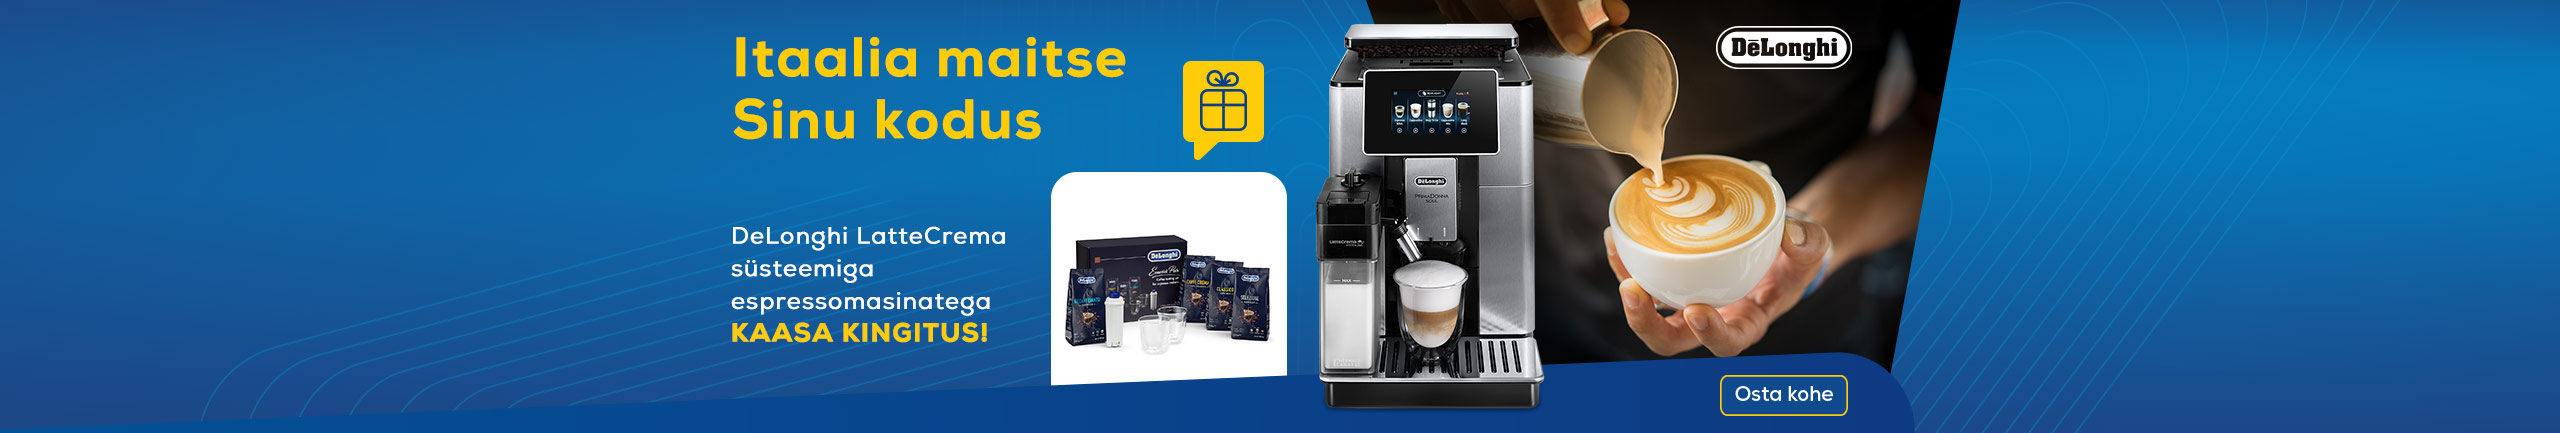 Buy DeLonghi LatteCrema and receive a complimentary gift!